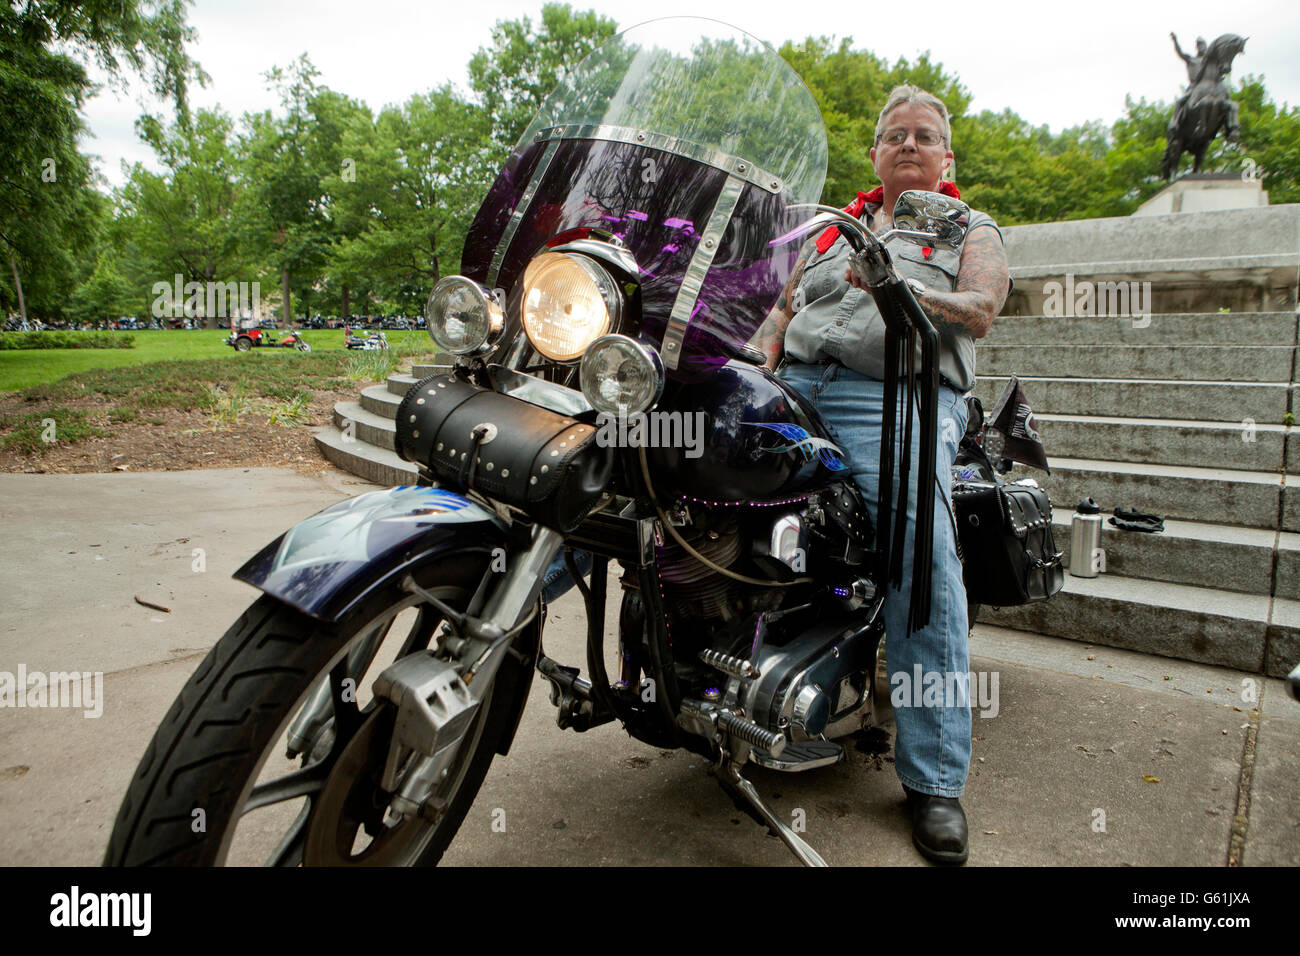 Washington, DC, USA, 29 mai 2016 : Memorial Day Rolling Thunder Riders prendre une pause Banque D'Images